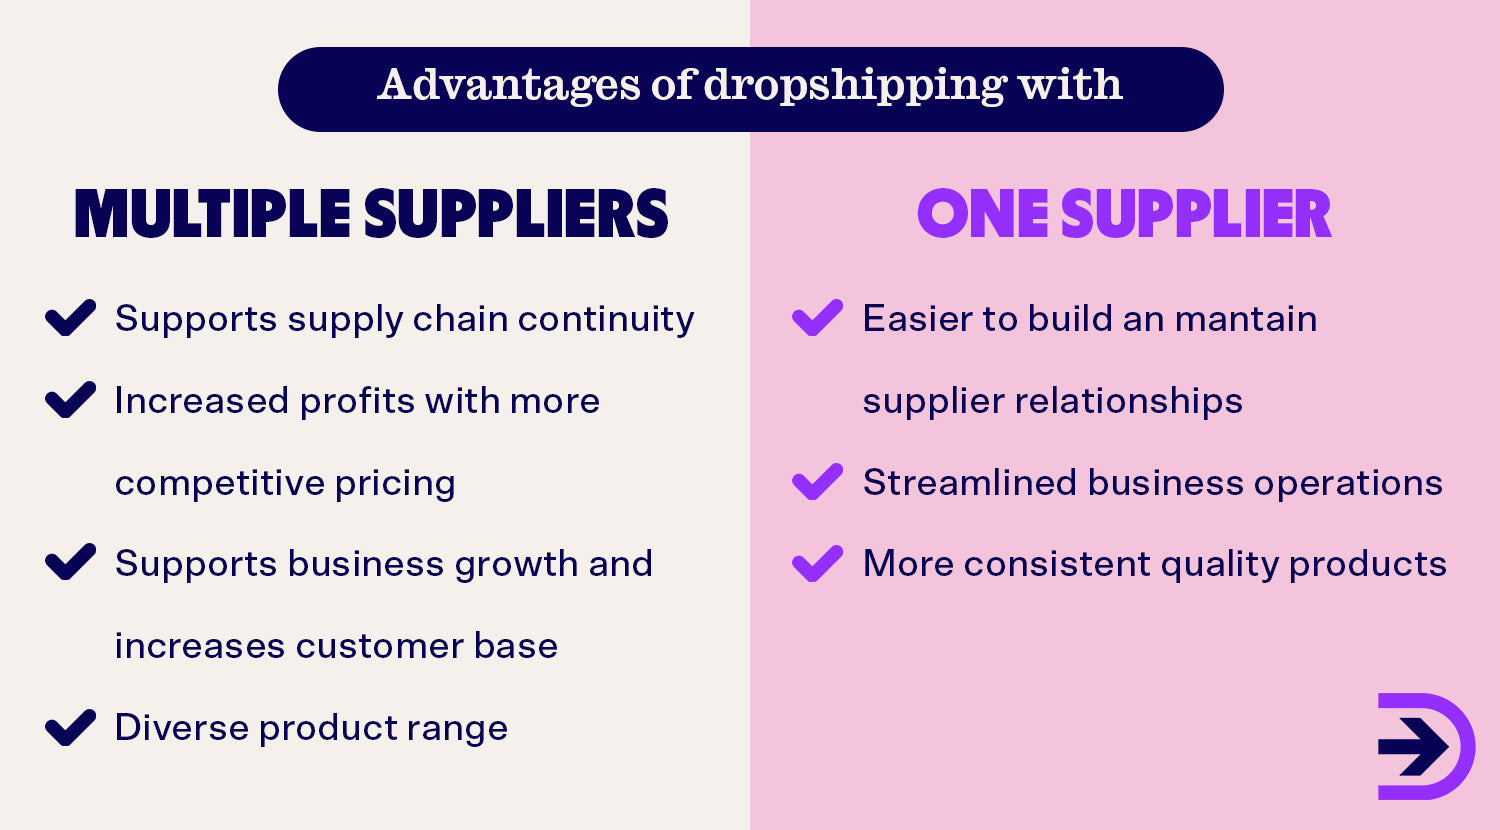 Whether you choose to work with multiple suppliers or just one, the experts at Dropshipzone have got your back.